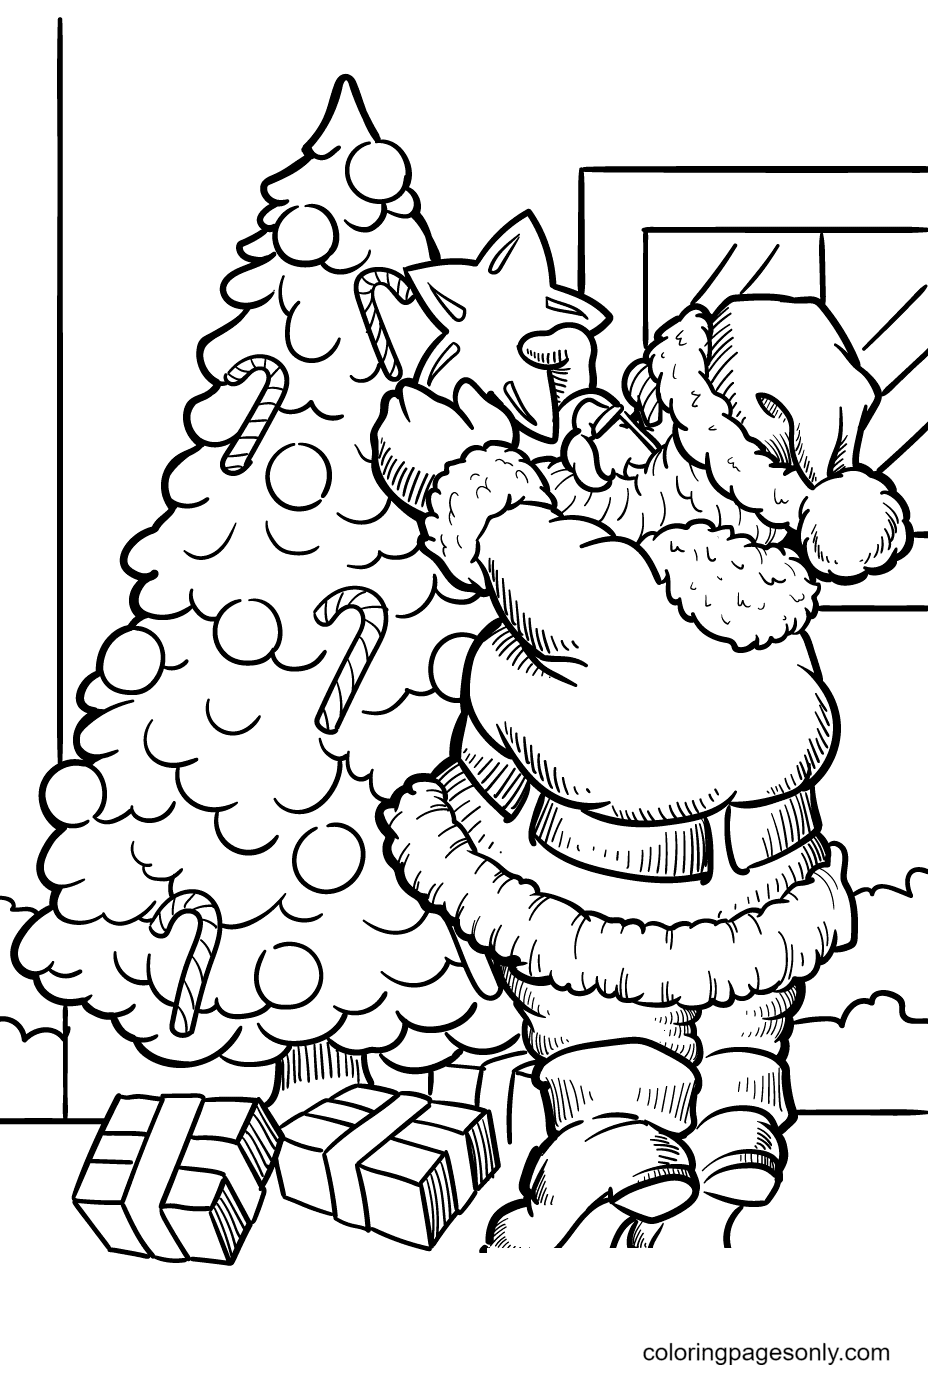 Santa Put a Big Star on Top of the Christmas Tree Coloring Pages